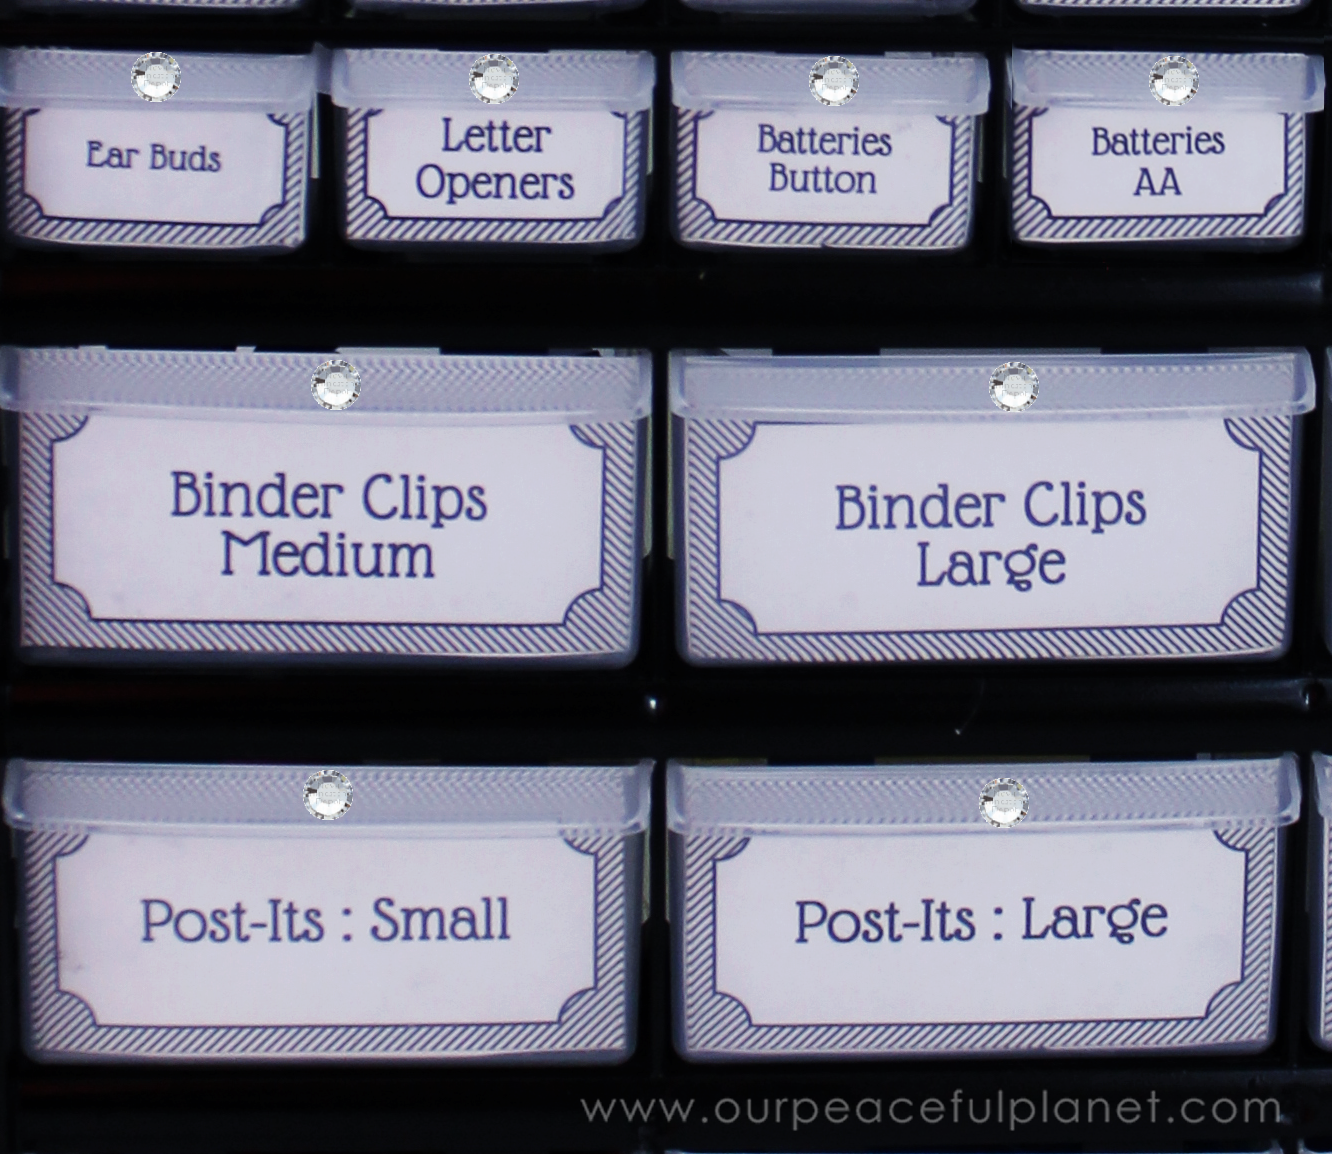 Organize office supplies in style with a plastic parts chest. With a little paint, some nice labels and a few rhinestones you a beautiful addition to your home office!